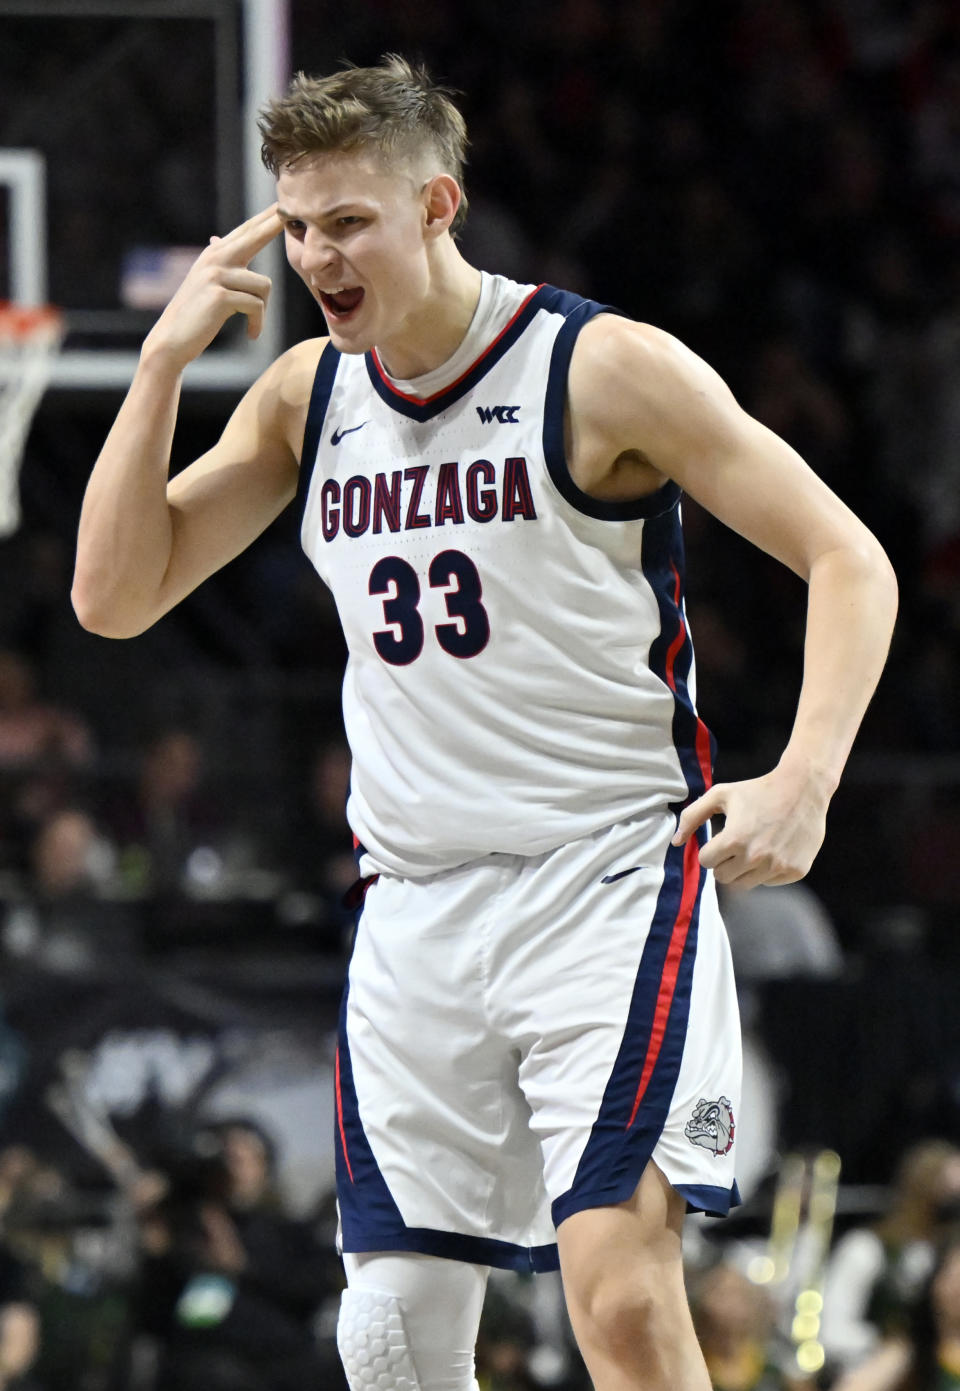 Gonzaga forward Ben Gregg (33) reacts after a 3-point basket against San Francisco during the second half of an NCAA college basketball game in the semifinals of the West Coast Conference men's tournament Monday, March 6, 2023, in Las Vegas. (AP Photo/David Becker)